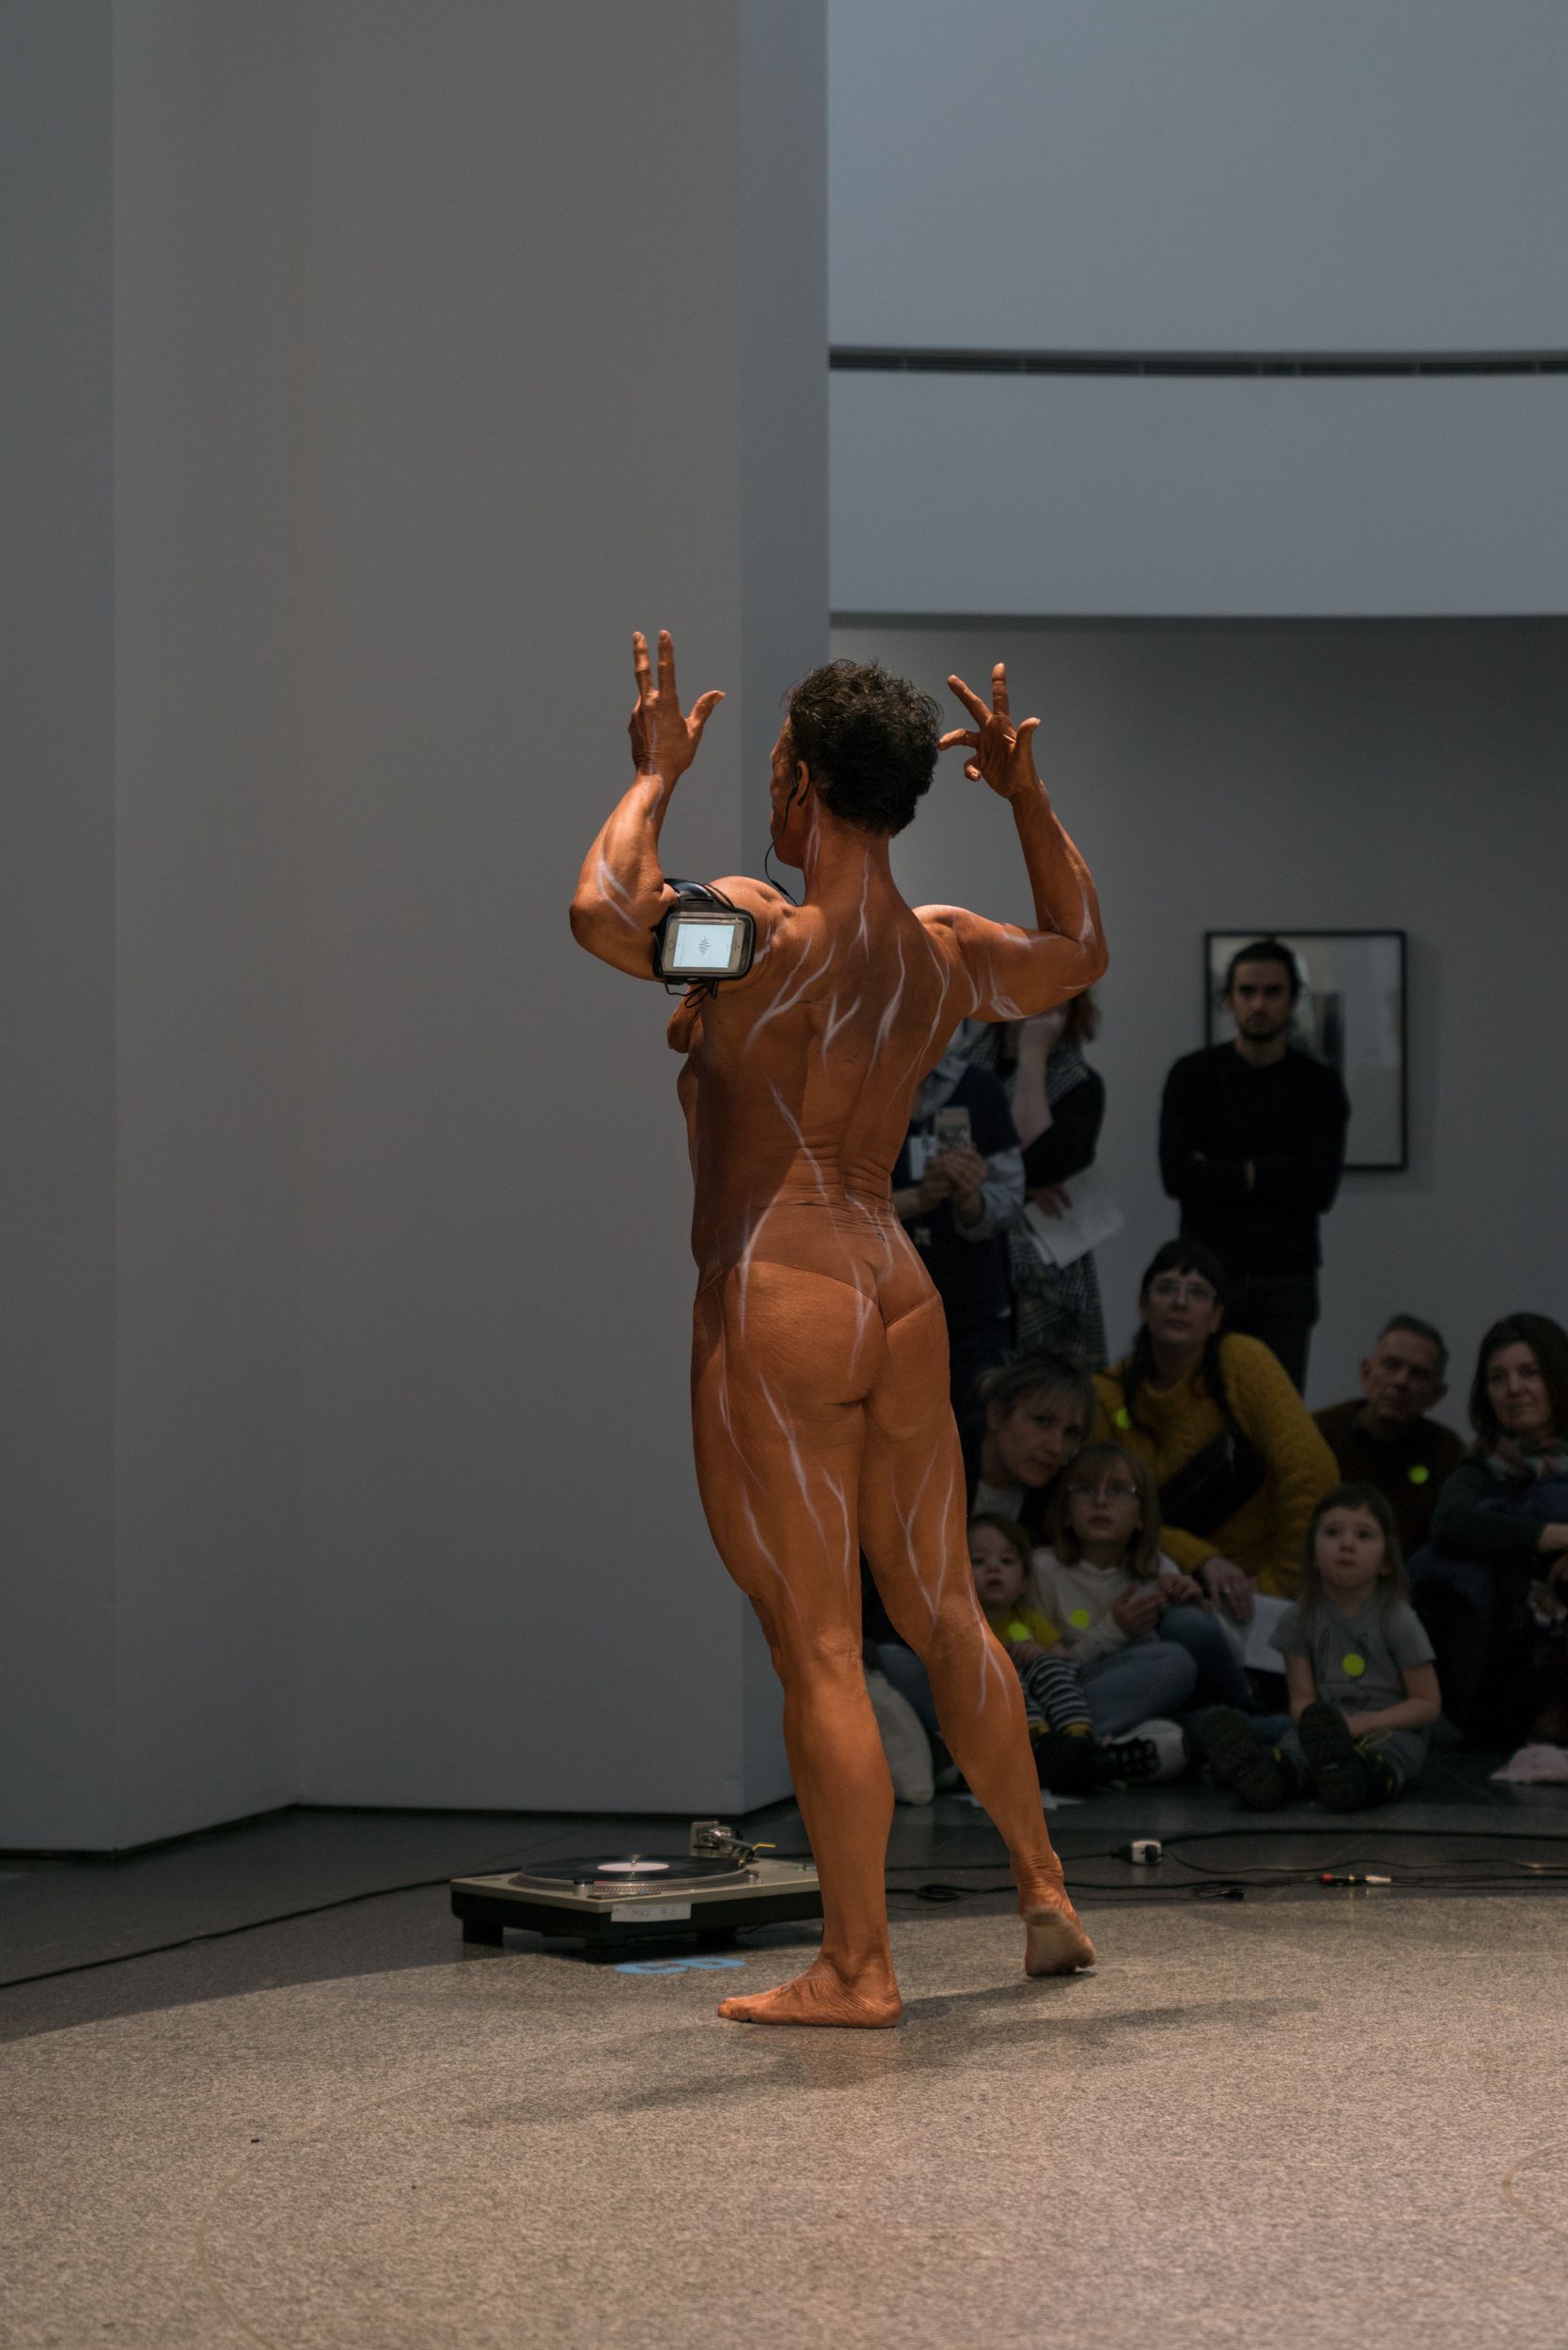 Female bodybuilder posing for PPKK 04.01 by Sarah Ancelle Schoenfeld and Louis-Philippe Scoufaras at Emerge MAC Montreal